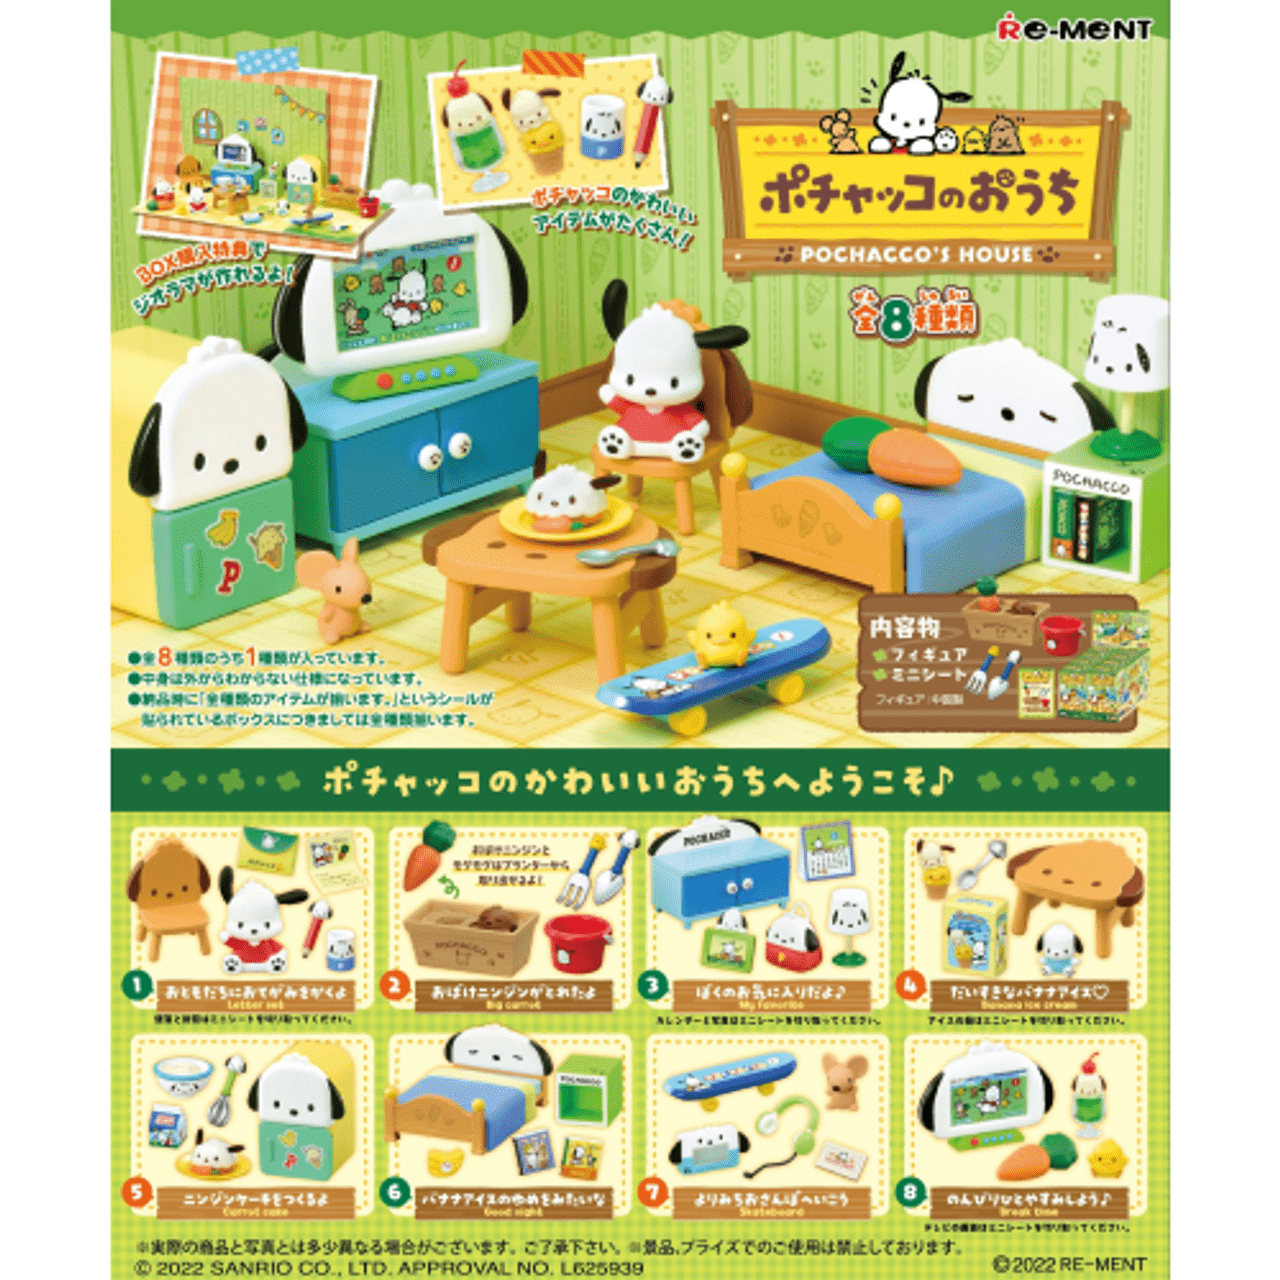 Re-ment Pochacco's House